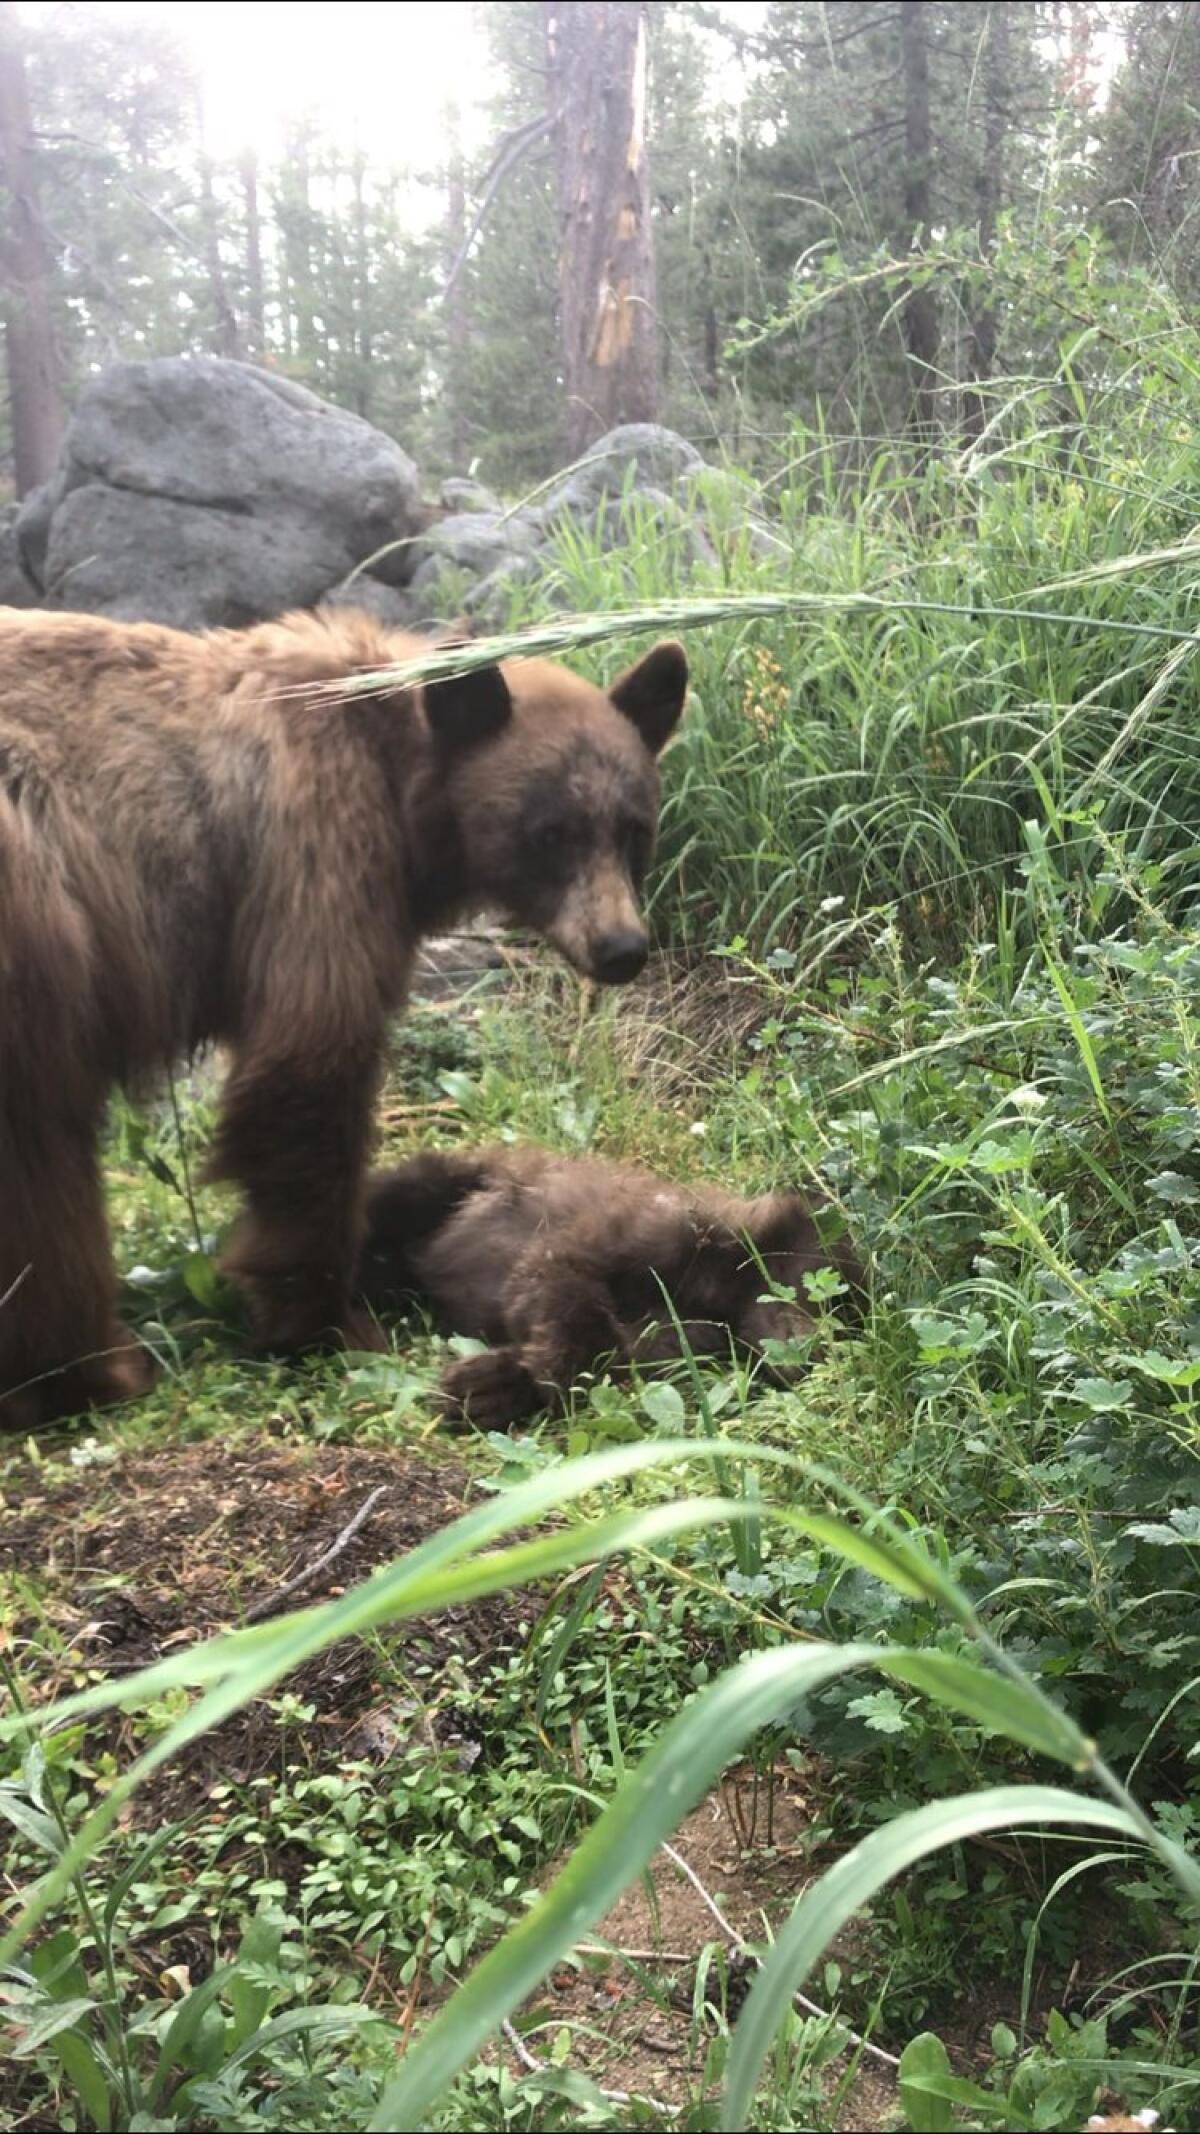 A mother bear stands over the body of her cub, killed by a vehicle in Yosemite National Park.